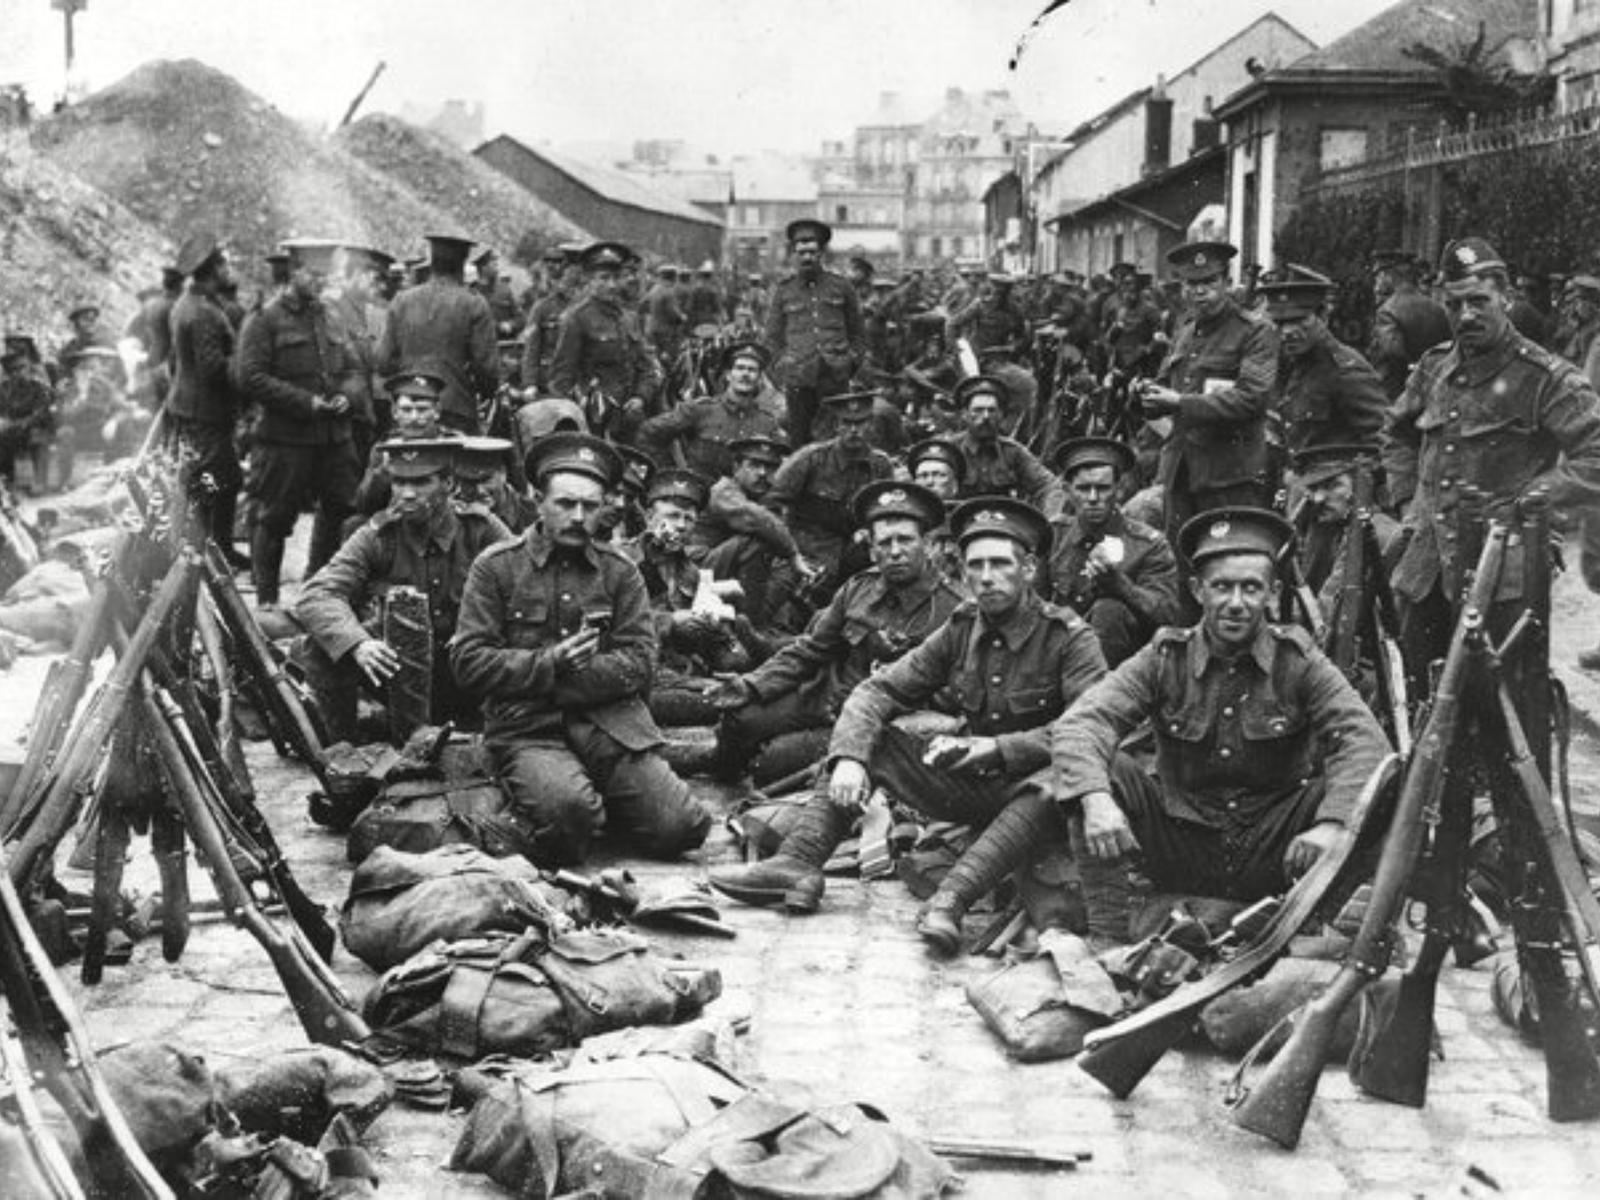 Soldiers sitting for a photo in the Belgian city of Mons